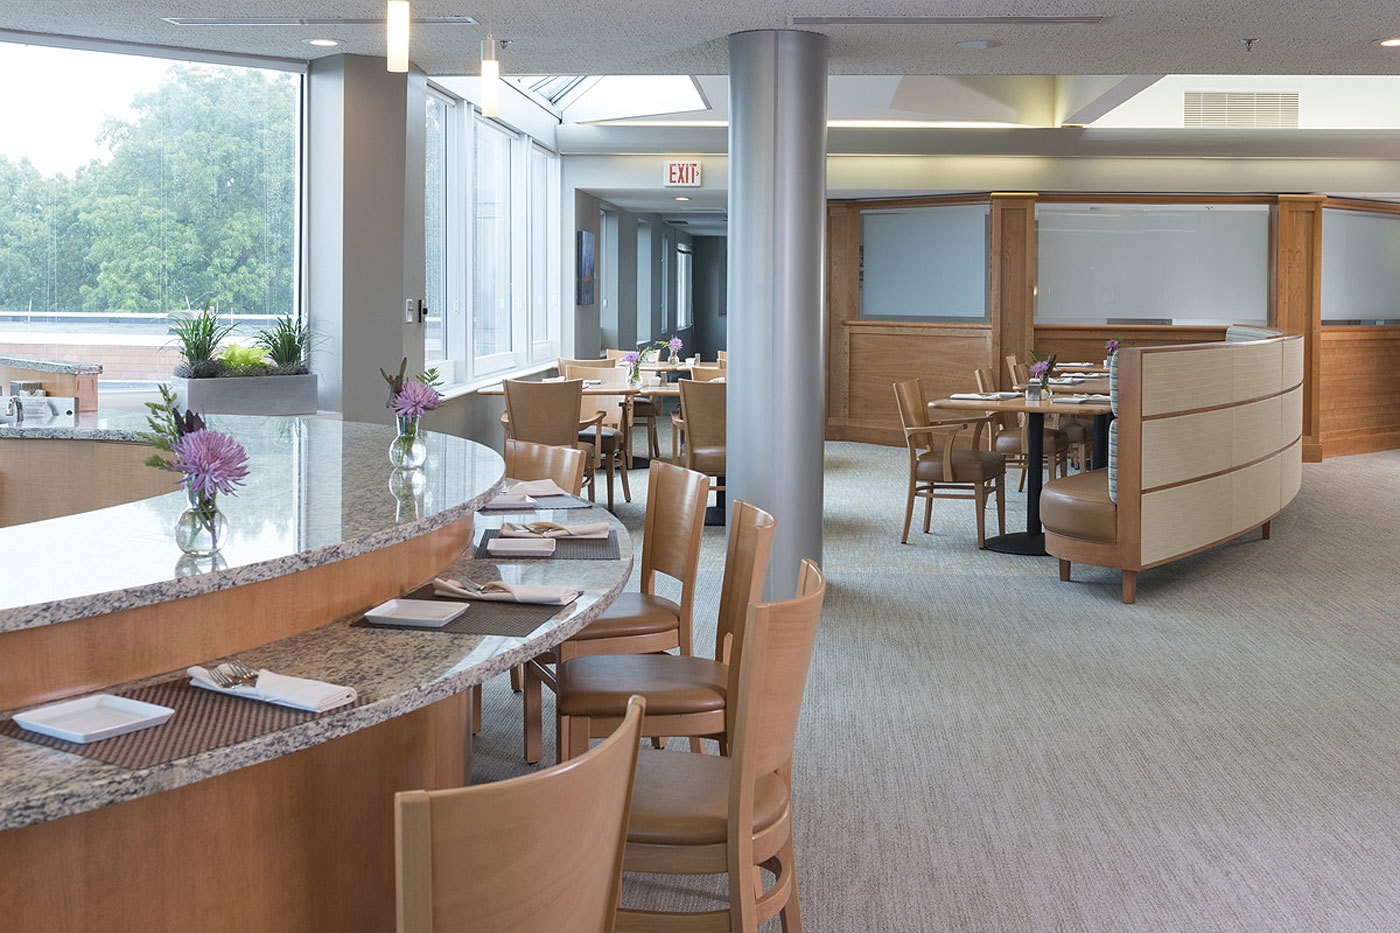 Seniors at this CCRC can belly up to the counter at this restaurant-styled dining area